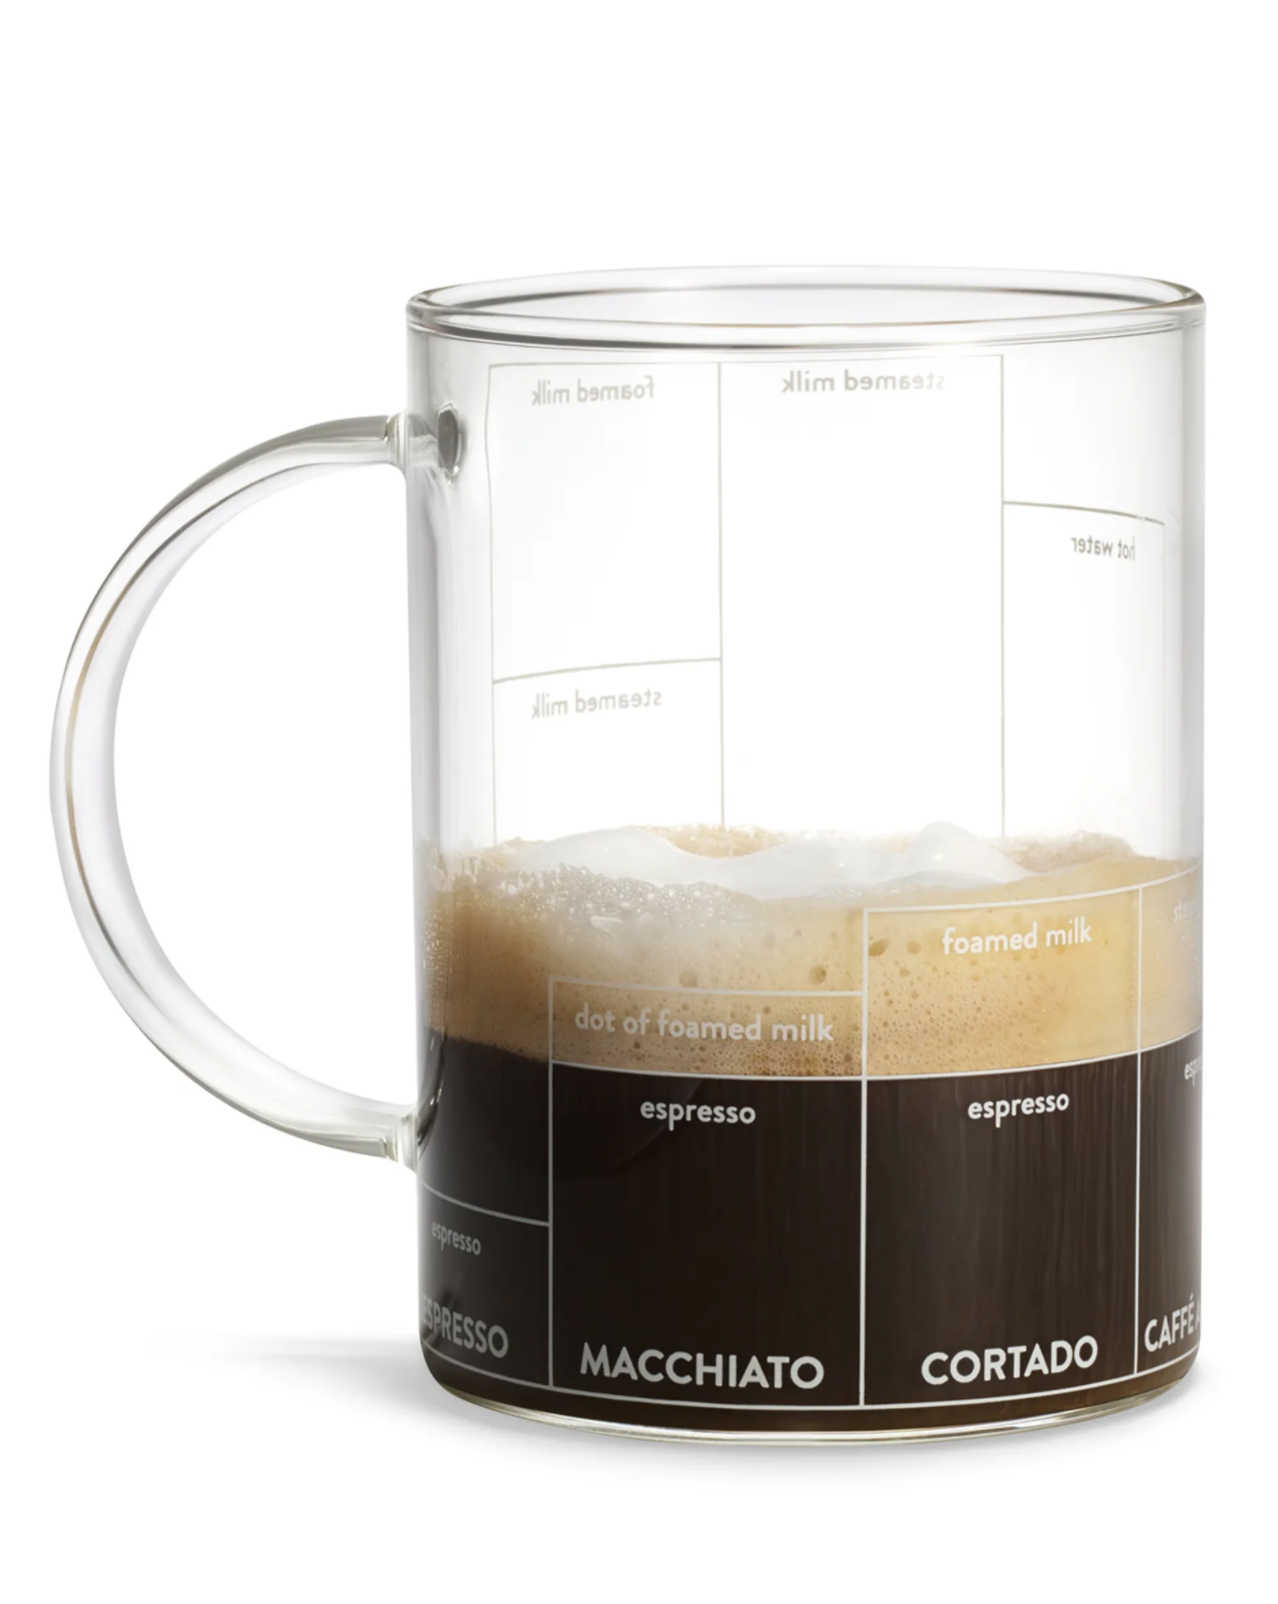 Learn and create with the multipurpose Multi-ccino Mug by MoMa Design Store. 